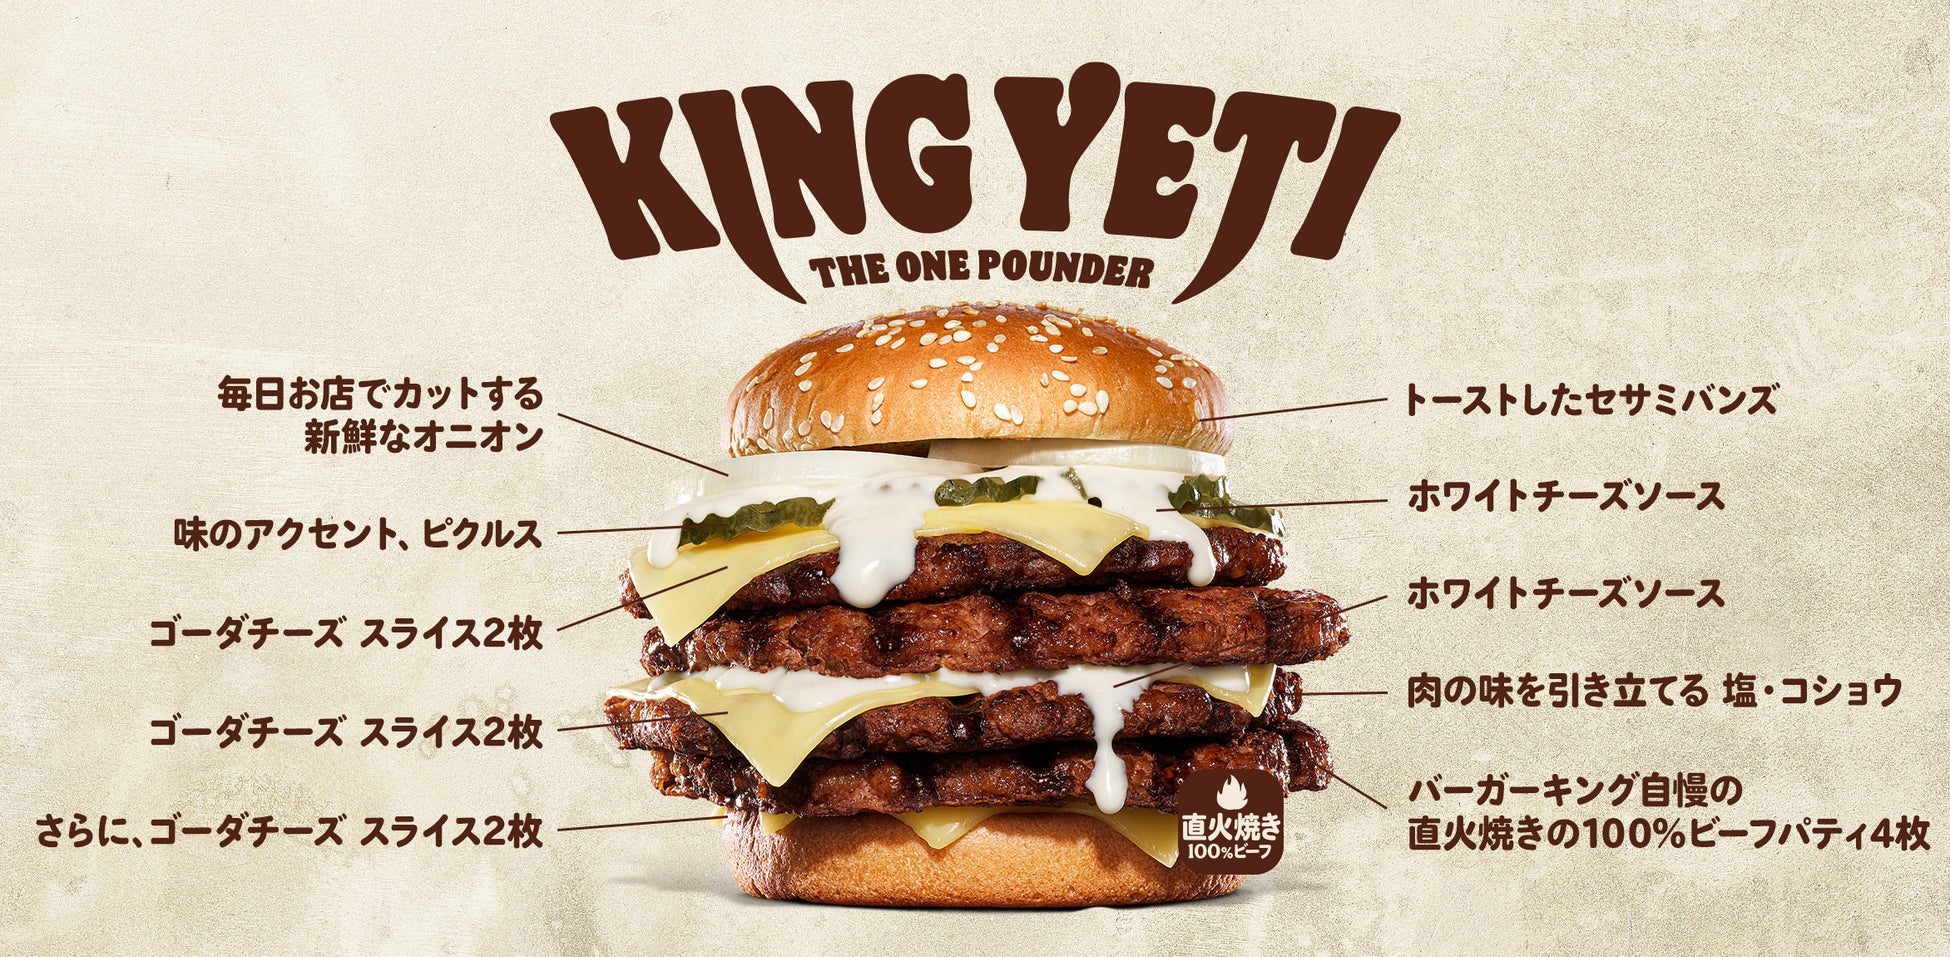 Burger King Japan unleashes King Yeti the One Pounder and all of 